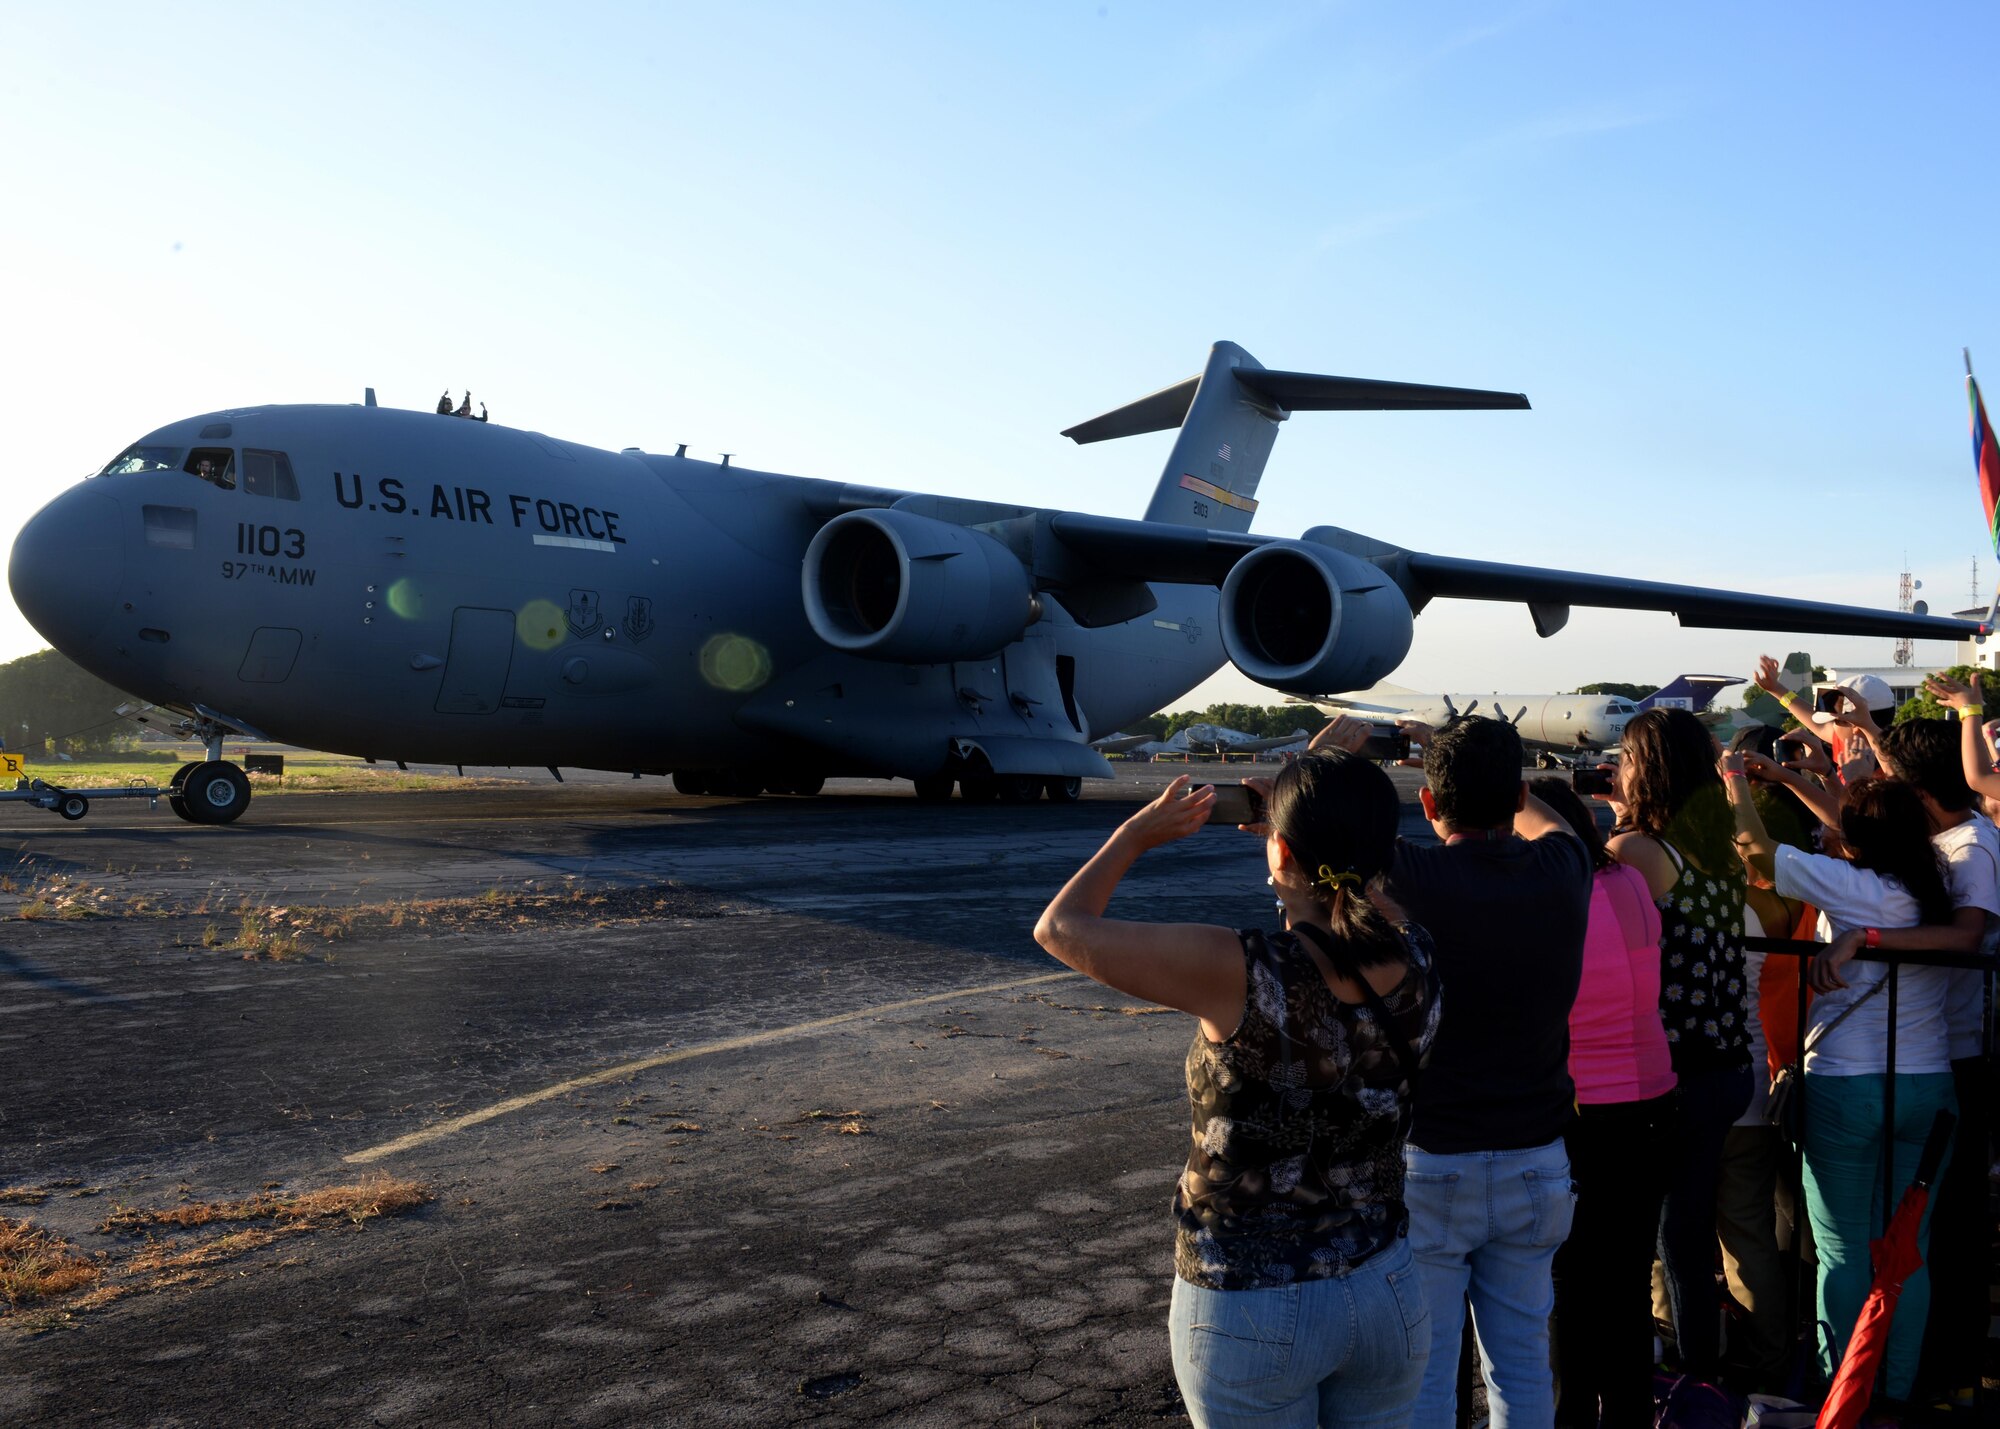 U.S. Air Force members wave to a crowd of people while a U.S. Air Force C-17 Globemaster III cargo aircraft, is being taxied prior to takeoff at Ilopango International Airport in San Salvador, El Savador, Jan. 30, during the 2016 Ilopango Airshow. The C-17 was sent from Altus Air Force Base, Okla., to foster relationships between the U.S. and El Salvador. The aircraft was setup as a static display for the attendees to view and learn about some of its capabilities. (U.S. Air Force photo by Senior Airman Franklin R. Ramos/Released)